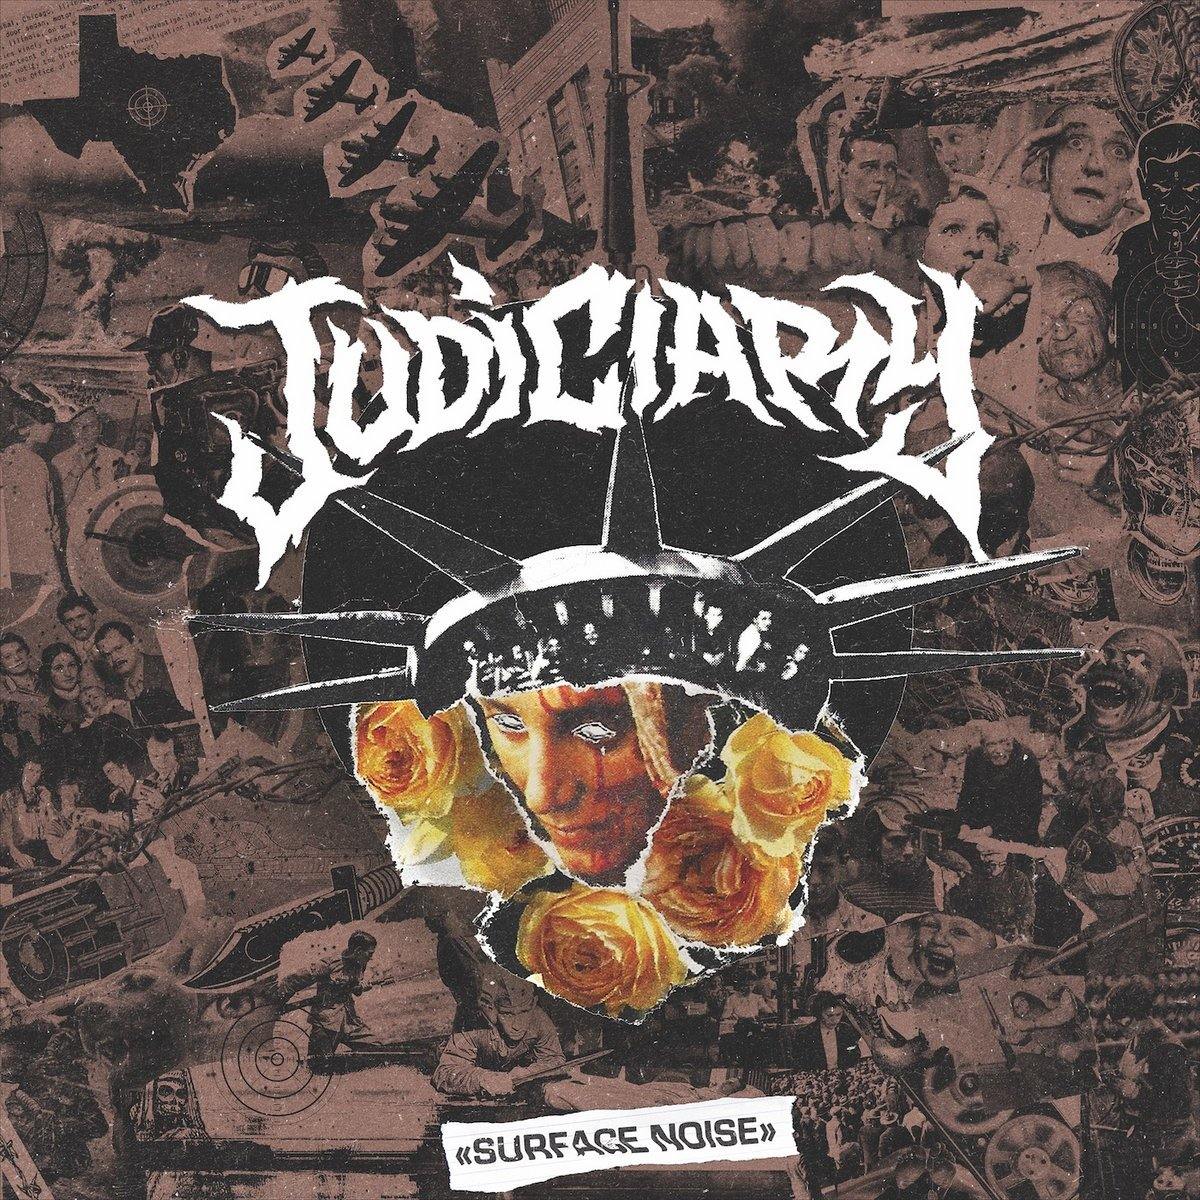 Buy – Judiciary "Surface Noise" CD – Band & Music Merch – Cold Cuts Merch